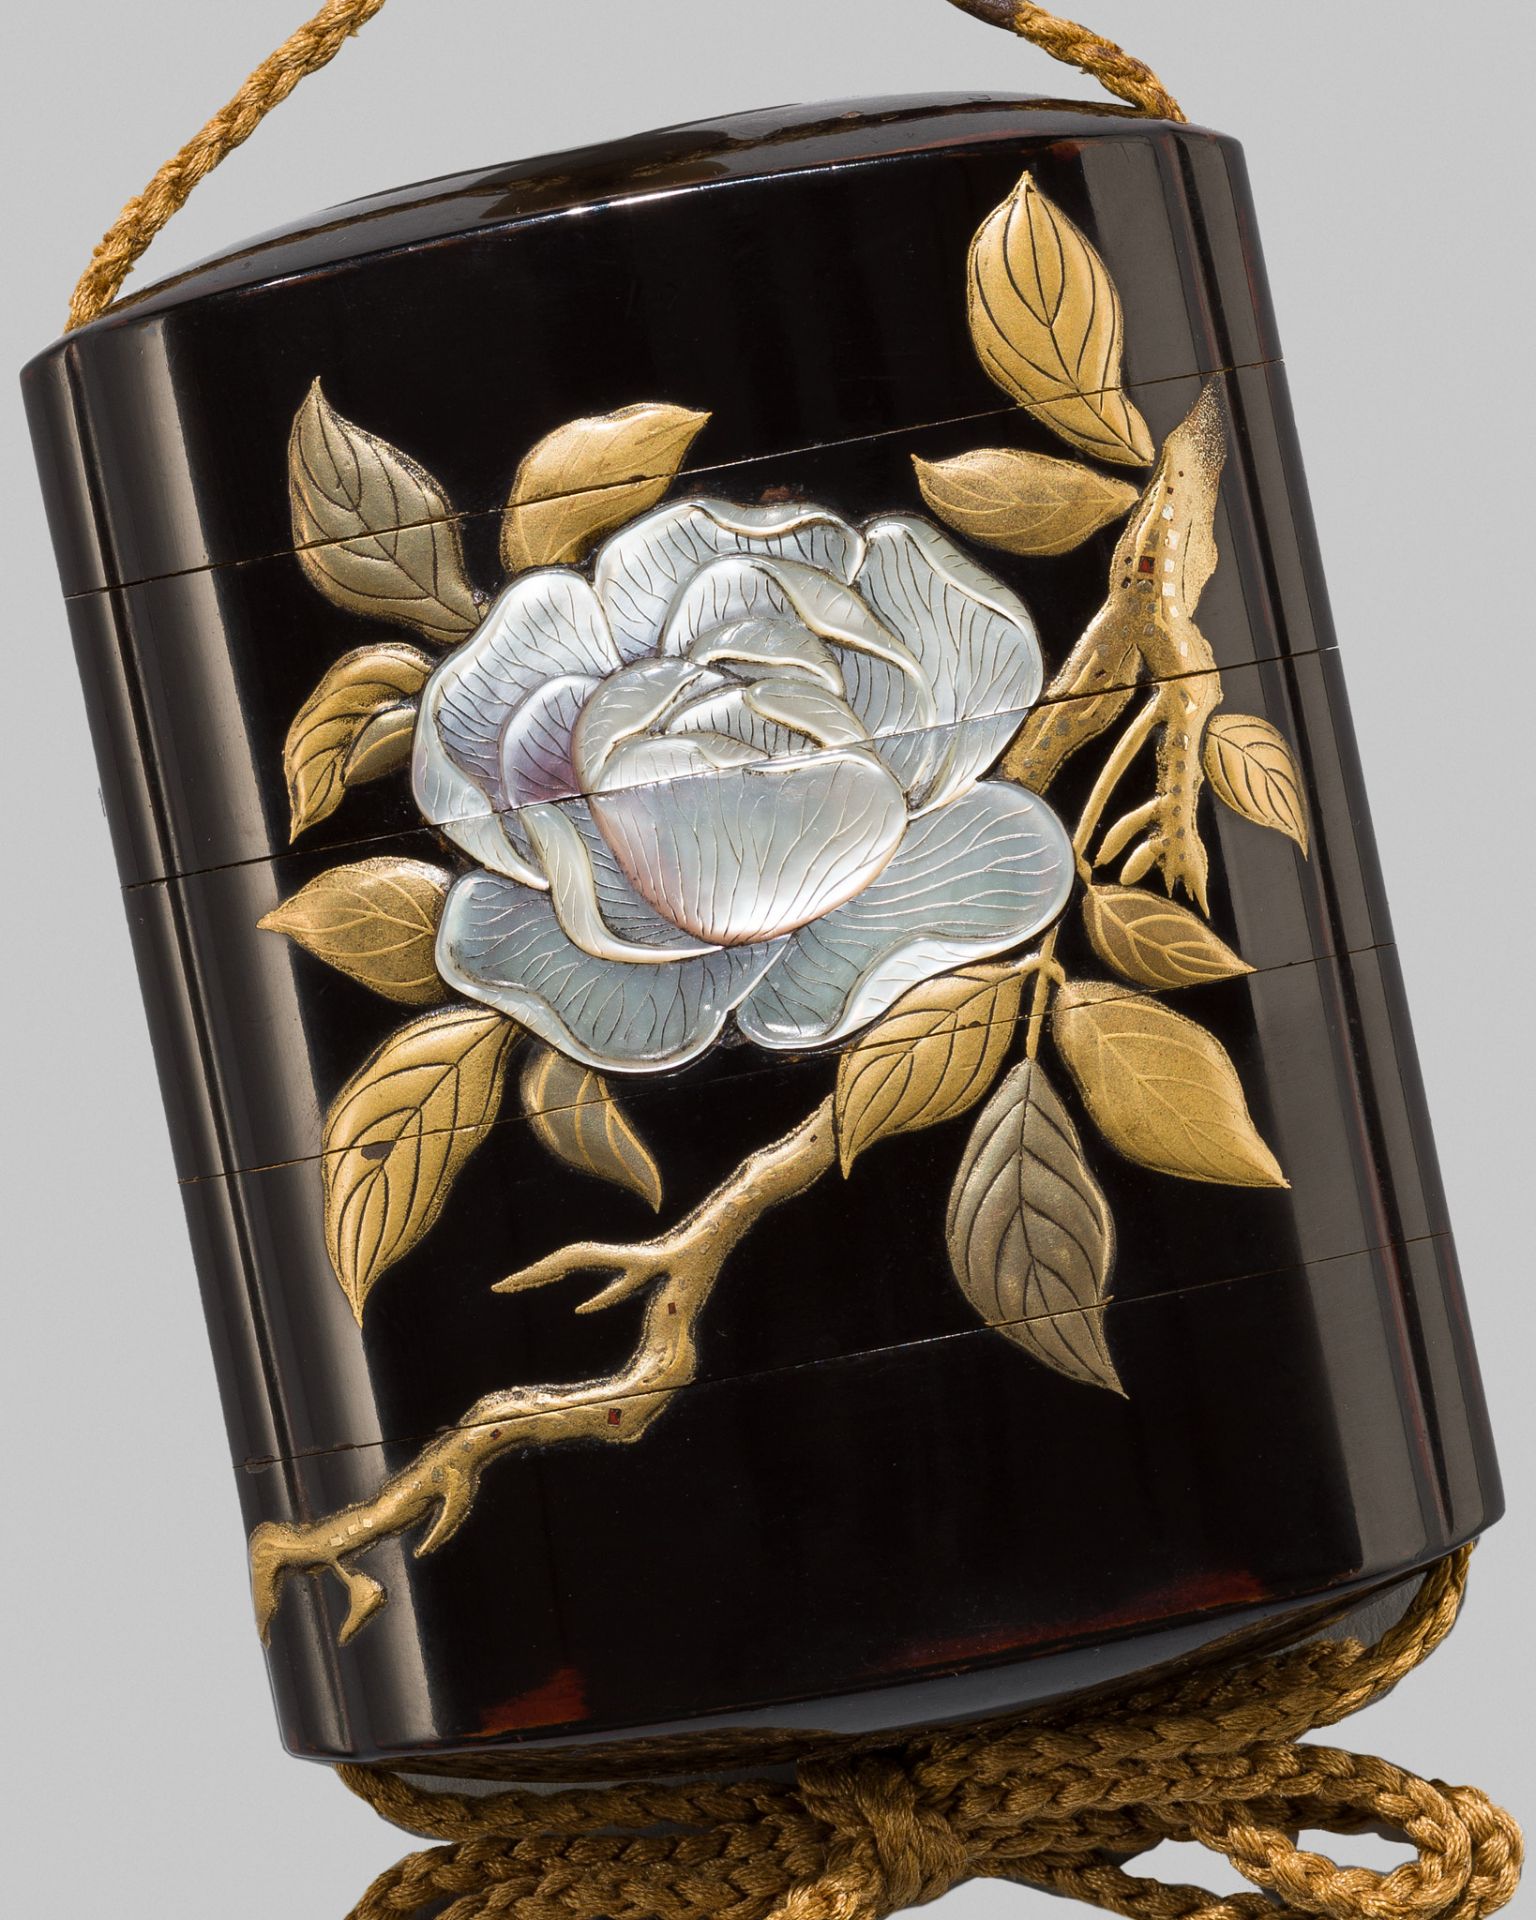 AN ELEGANT INLAID BLACK LACQUER FOUR-CASE INRO WITH CAMELLIA BLOSSOMS